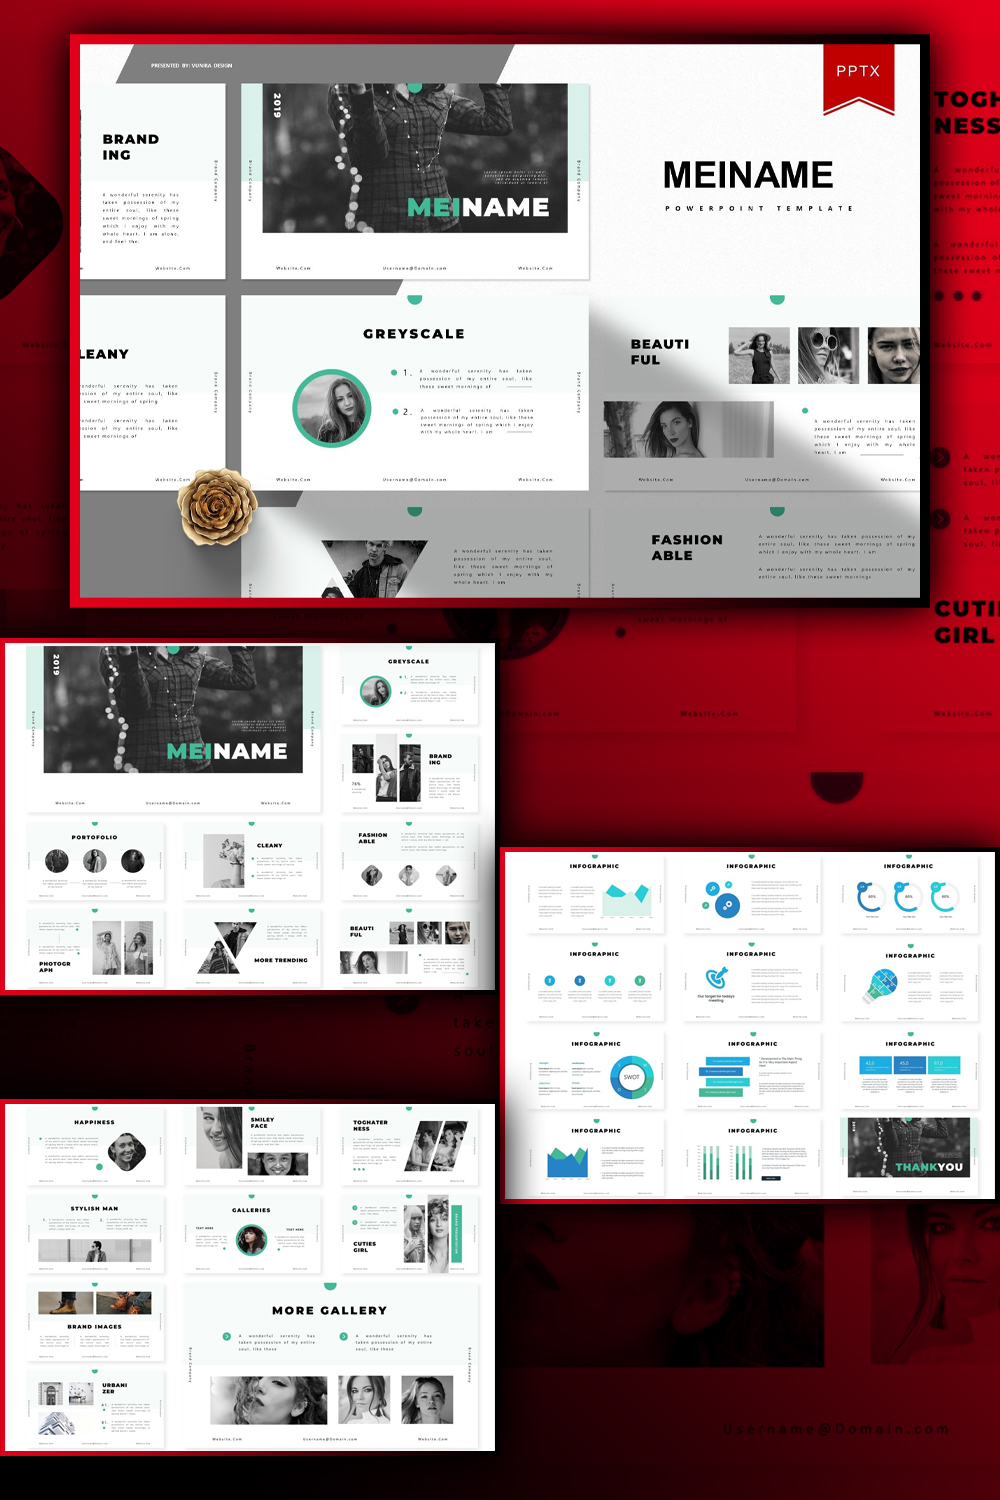 Illustrations meiname powerpoint template of pinterest.